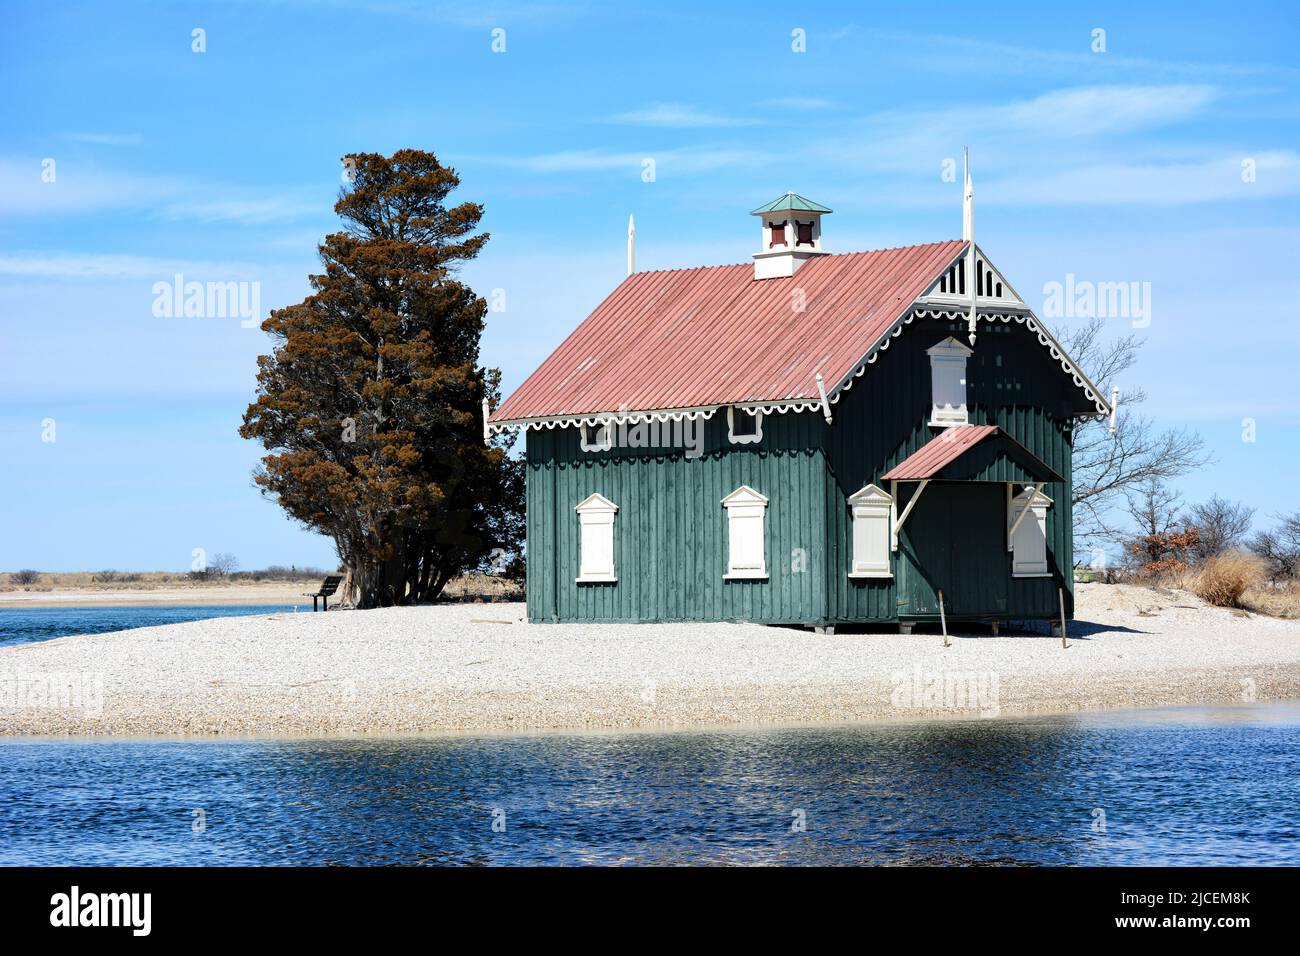 STONY BROOK, NEW YORK - 1 APR 2015: Gamecock Cottage at the West Meadow Wetlands Reserve, on Long Island. Stock Photo